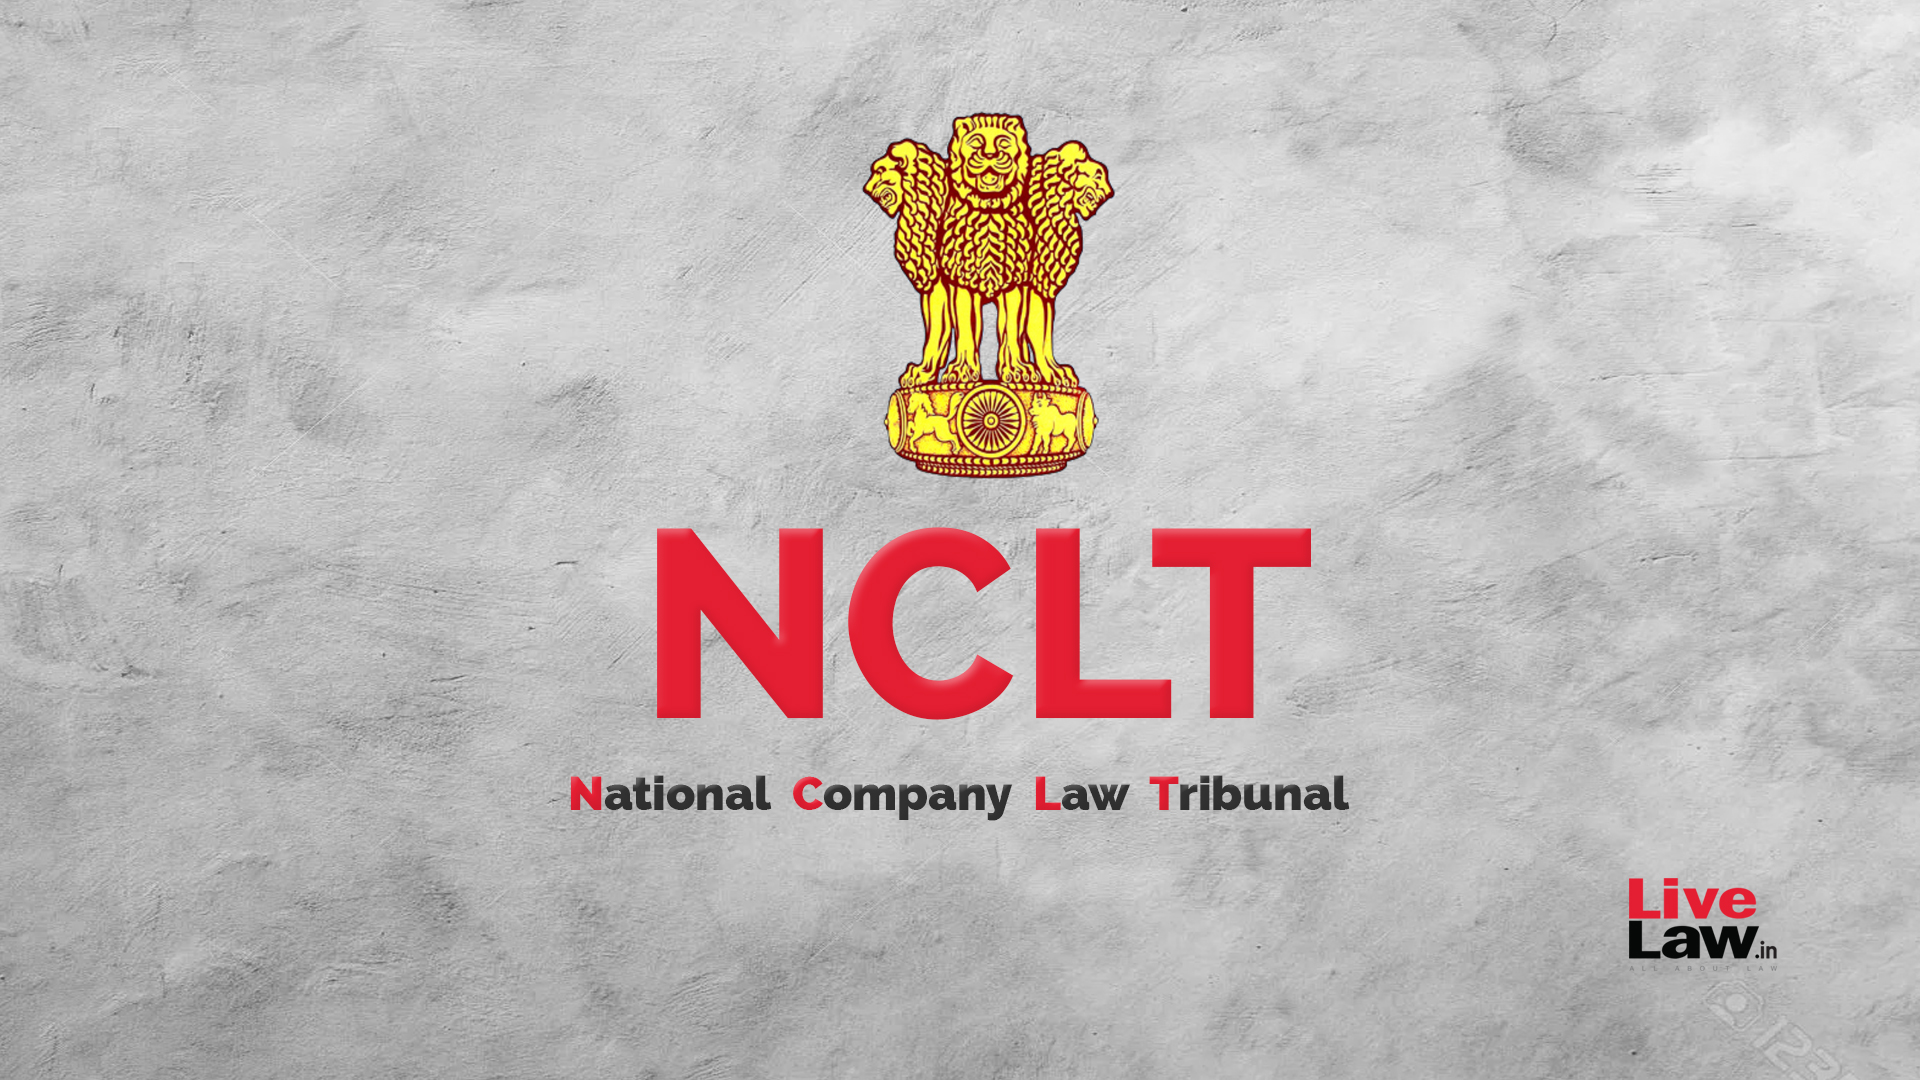 Salary During Notice Period Does Not Fall Within The Definition Of Operational Debt Under IBC: NCLT, Mumbai